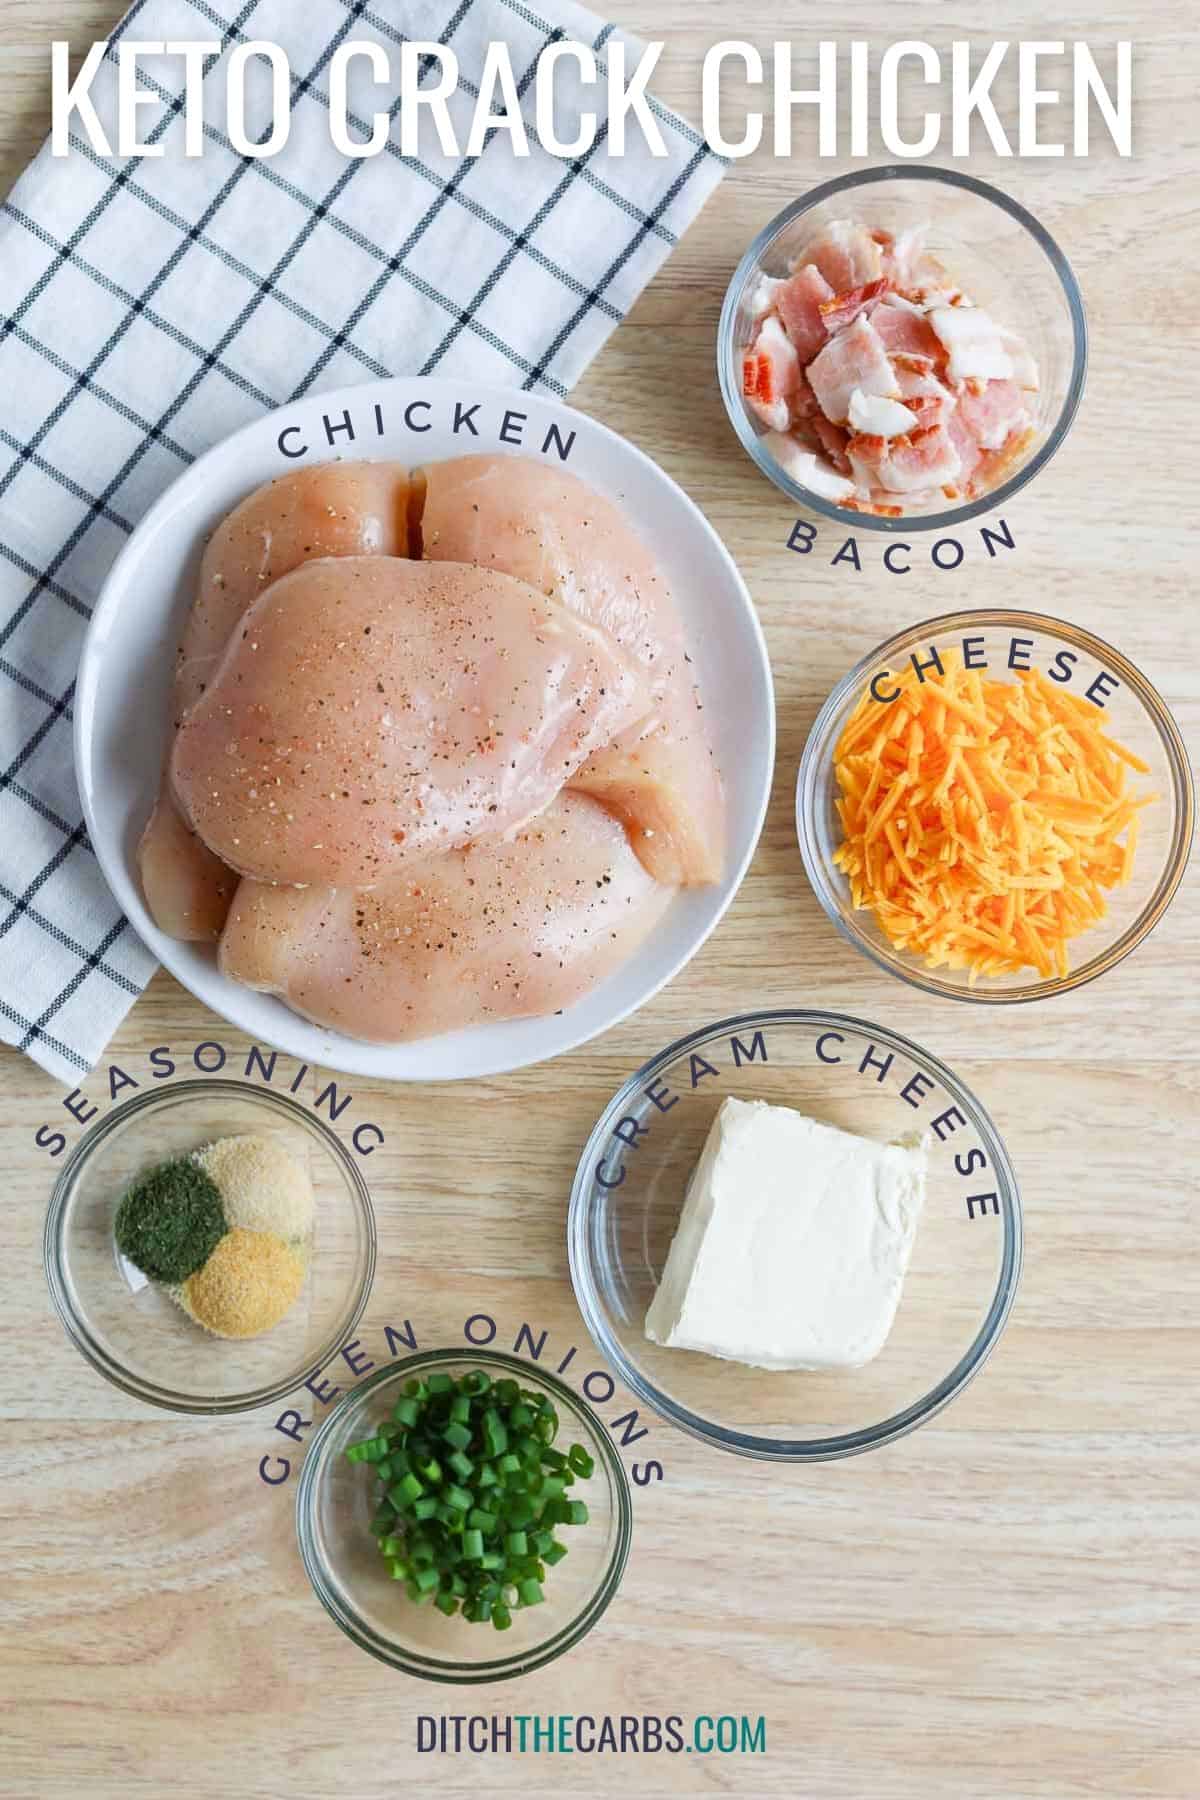 All the ingredients needed to make keto crack chicken in the slow cooker.